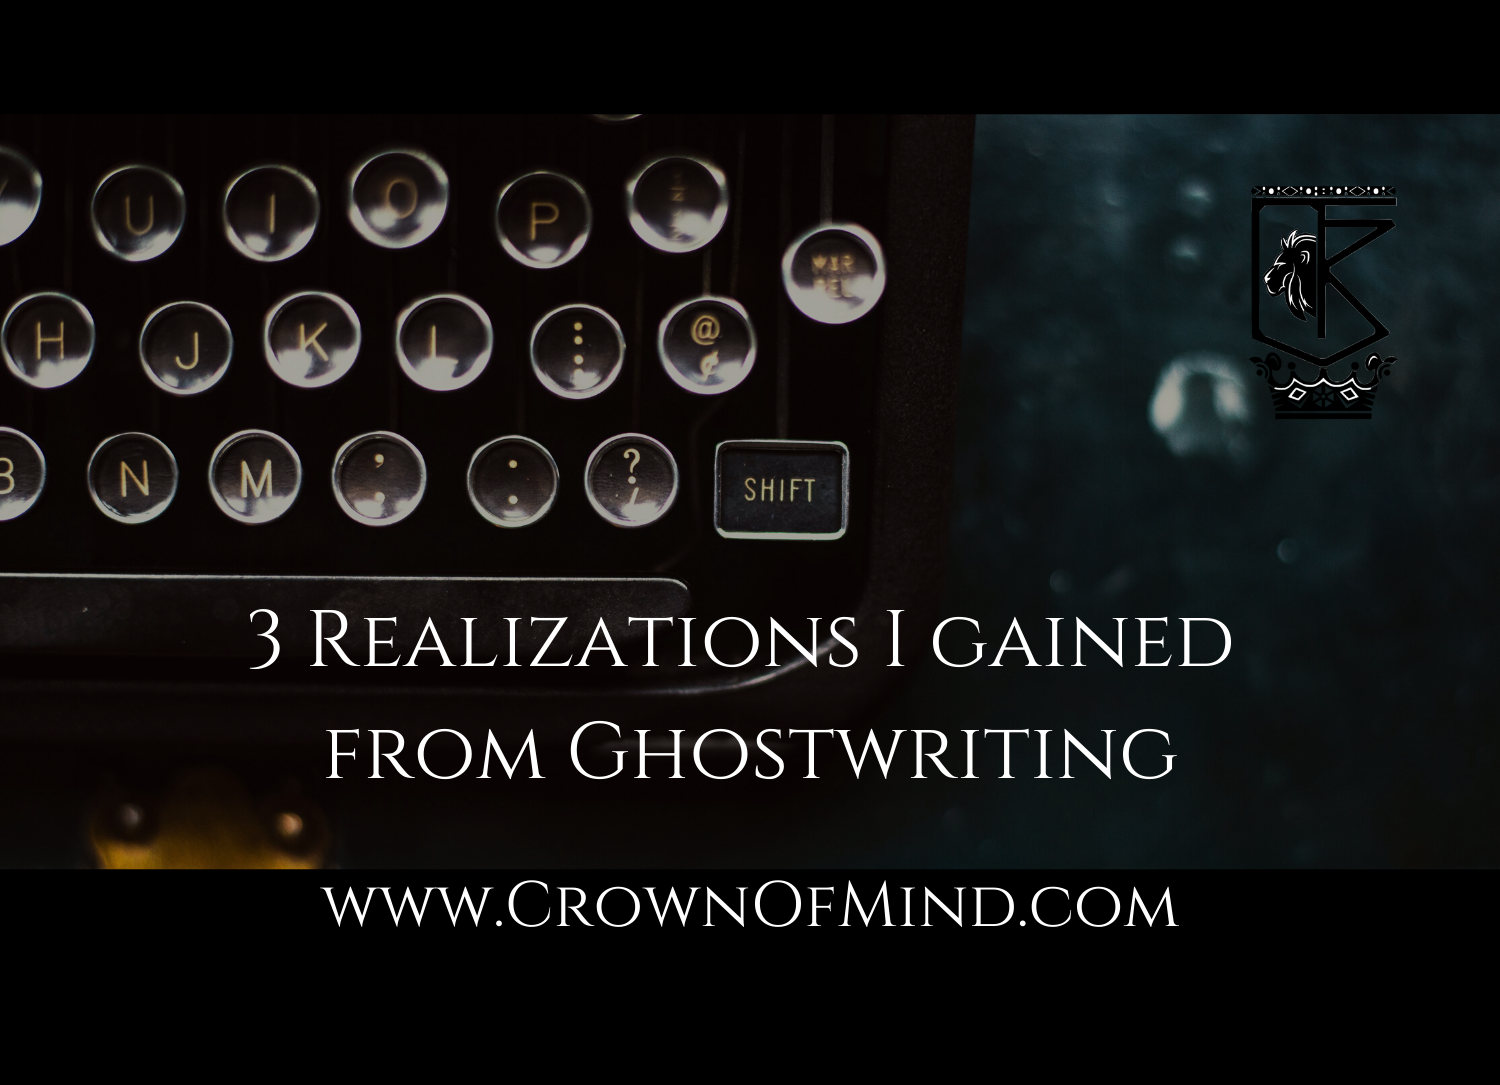 3 Realizations I Gained from Ghostwriting